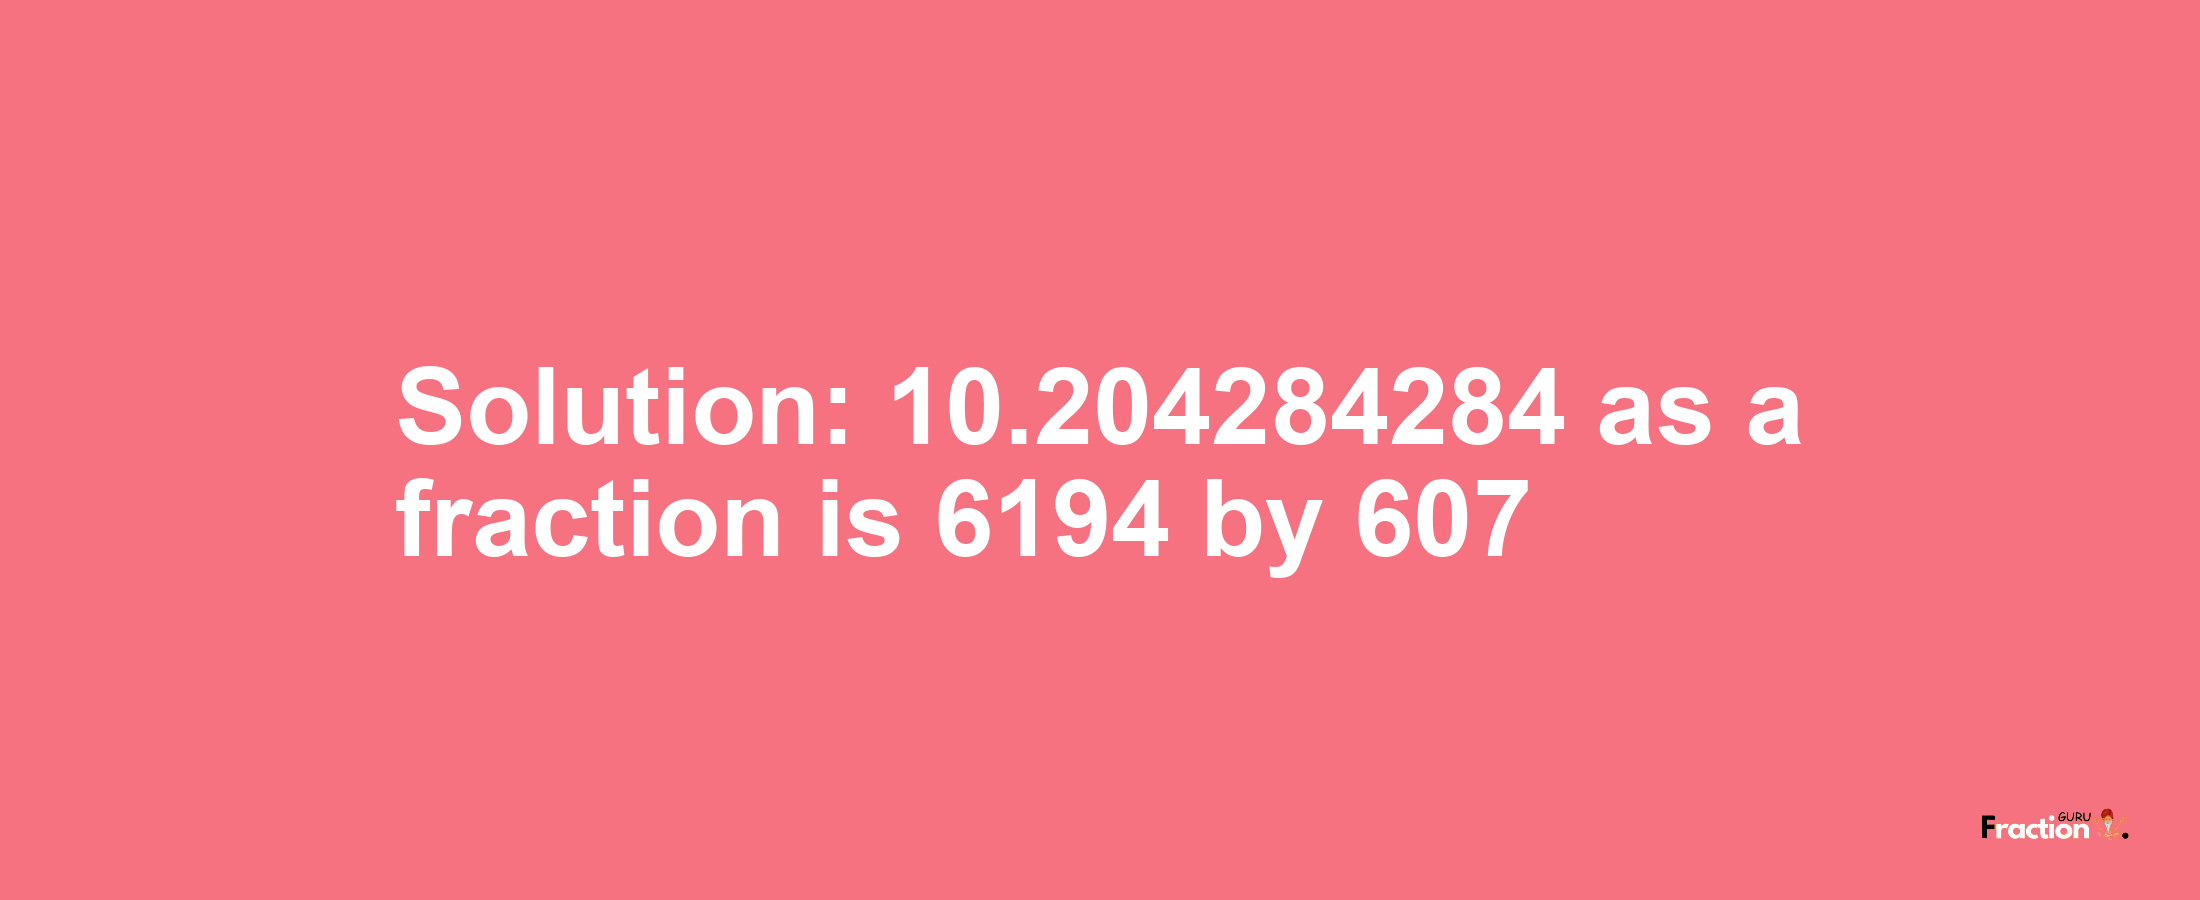 Solution:10.204284284 as a fraction is 6194/607